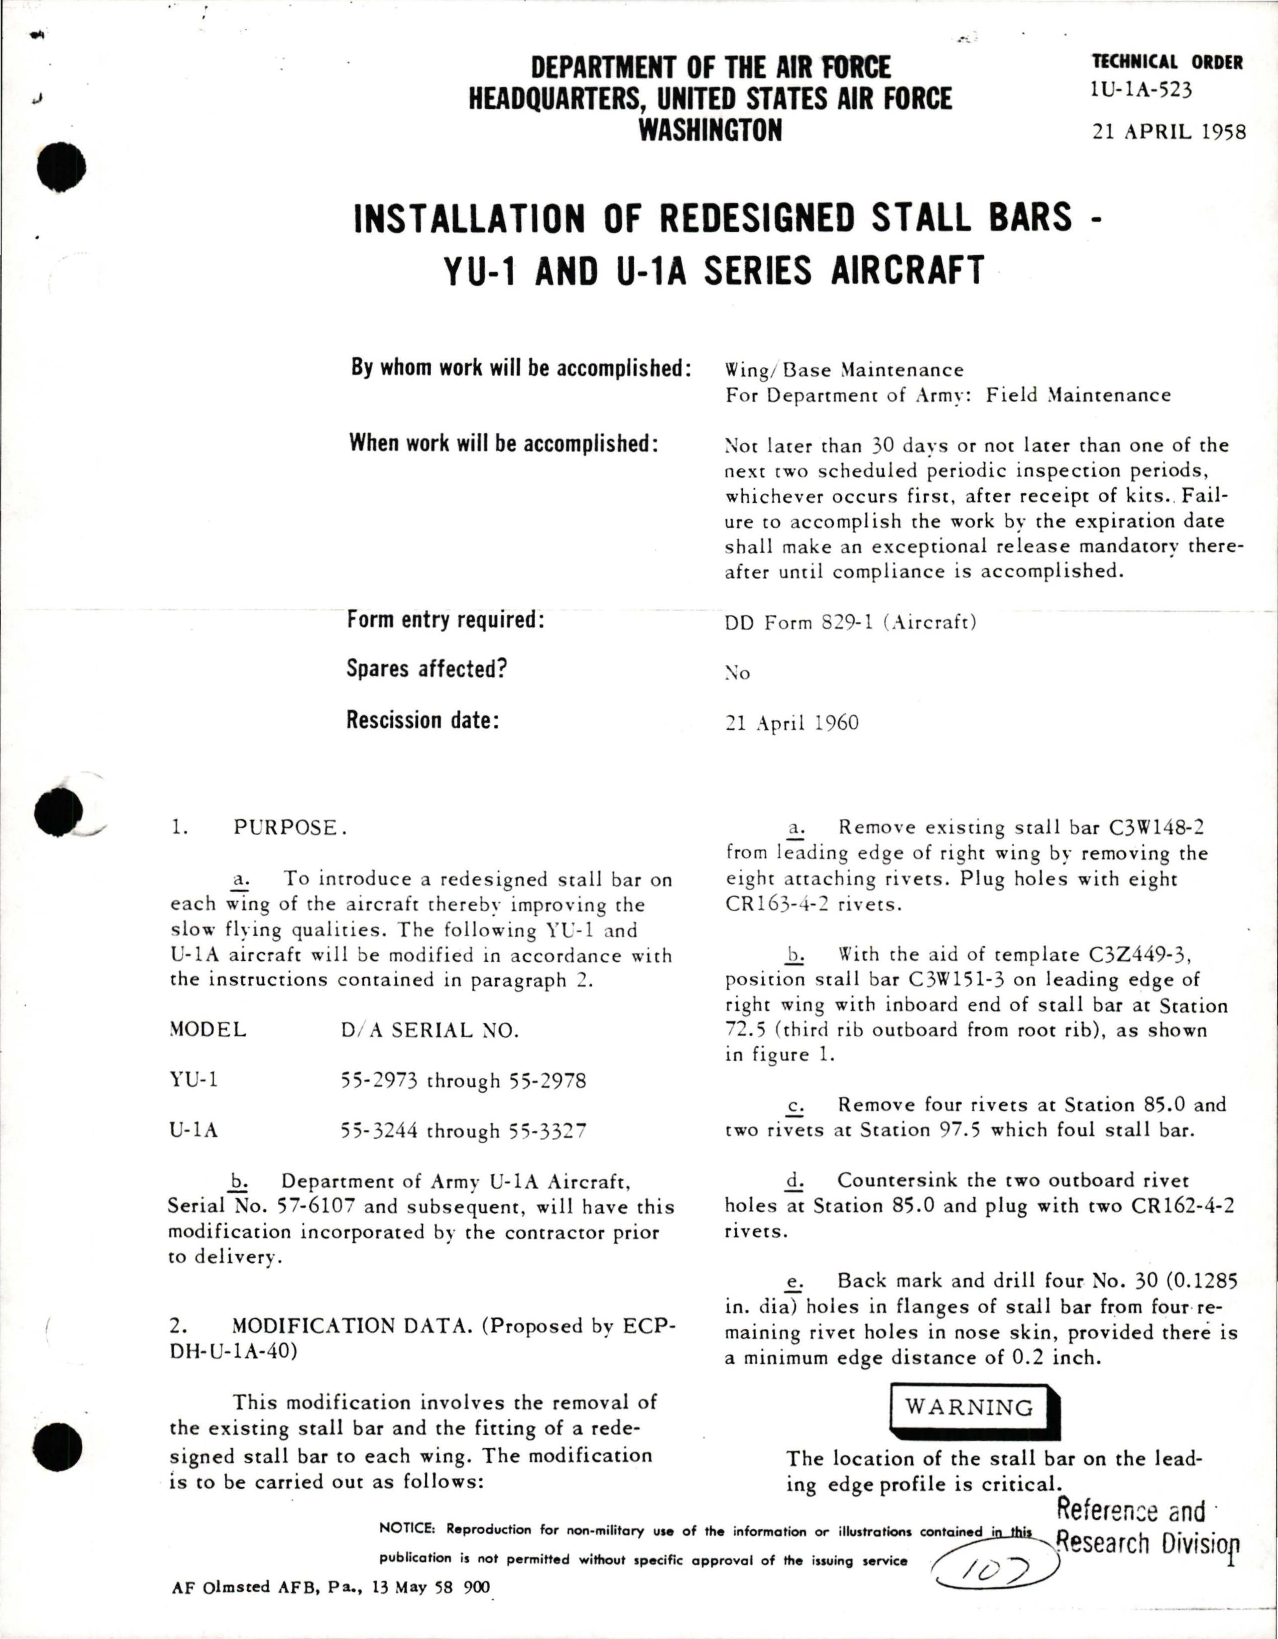 Sample page 1 from AirCorps Library document: Installation of Redesigned Stall Bars on YU-1 and U-1A